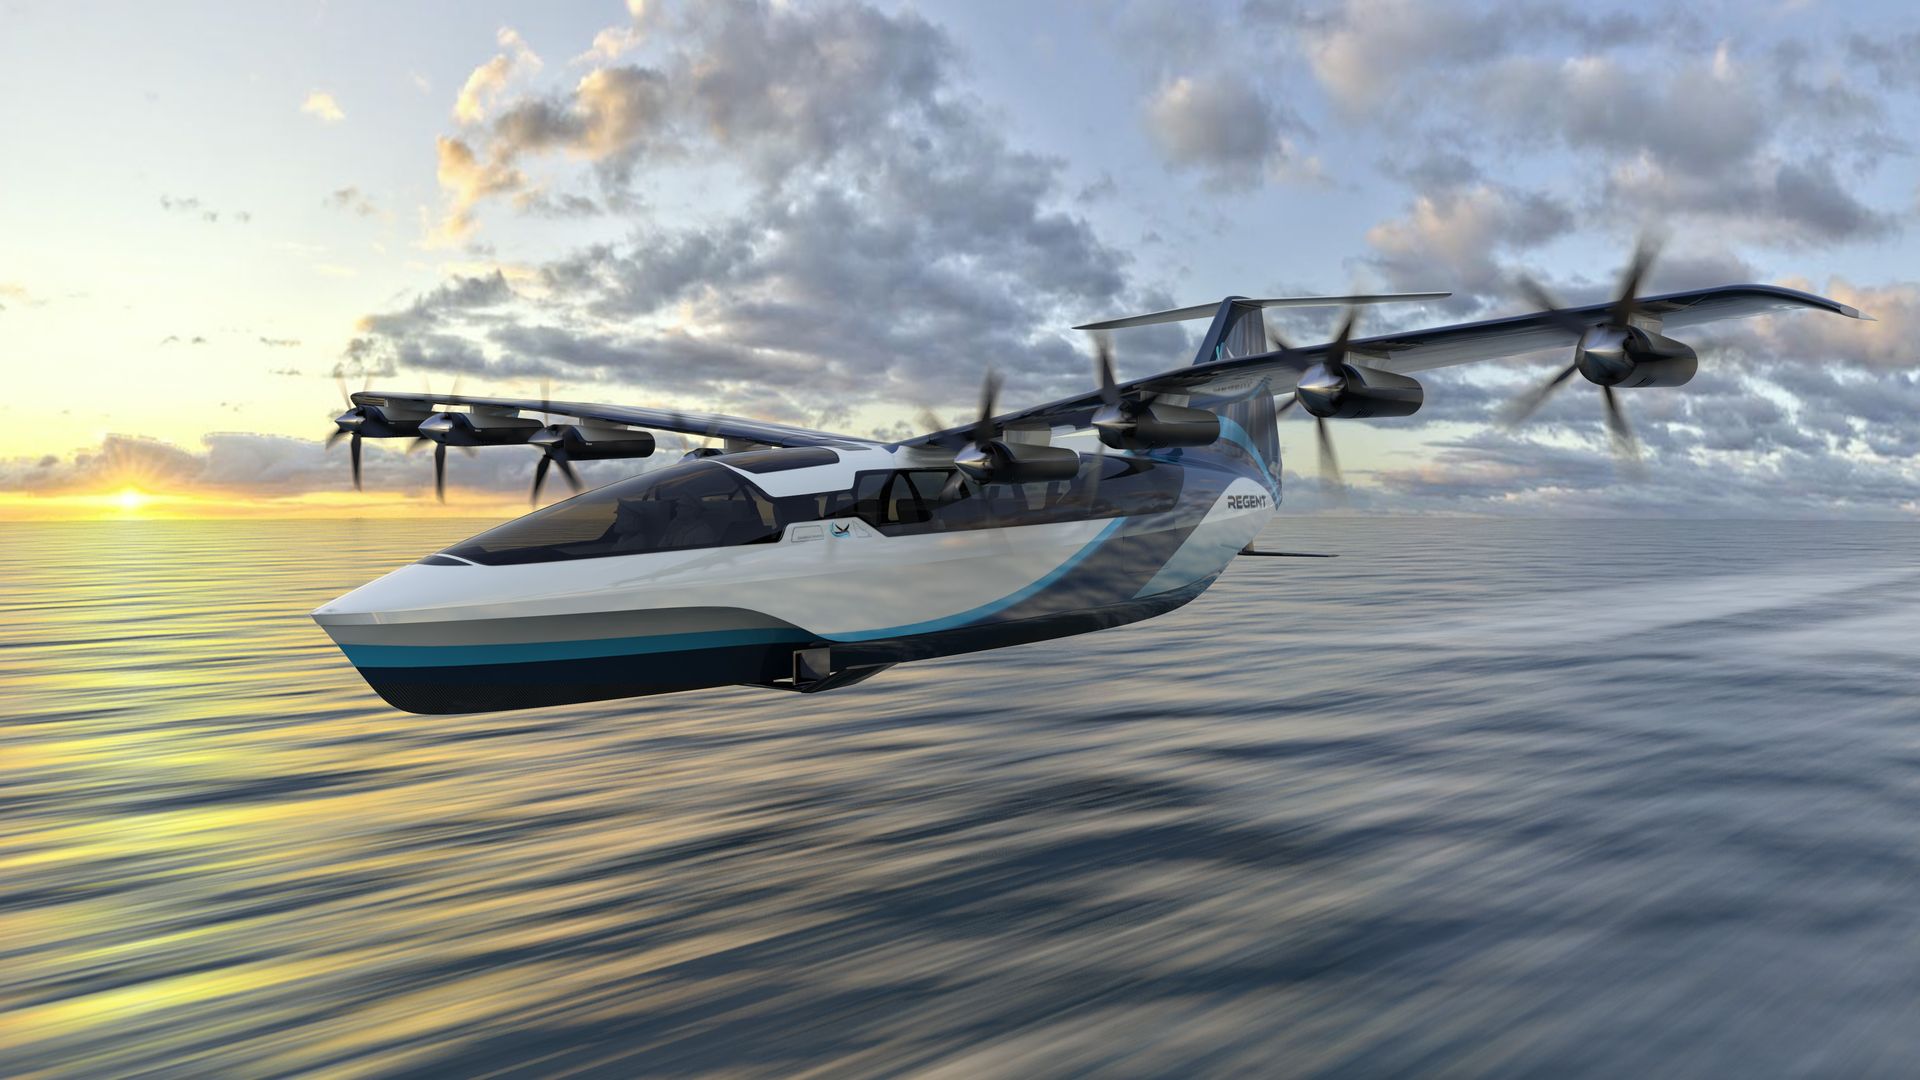 Rendering of a new type of low-flying aircraft that glides above the water like a pelican